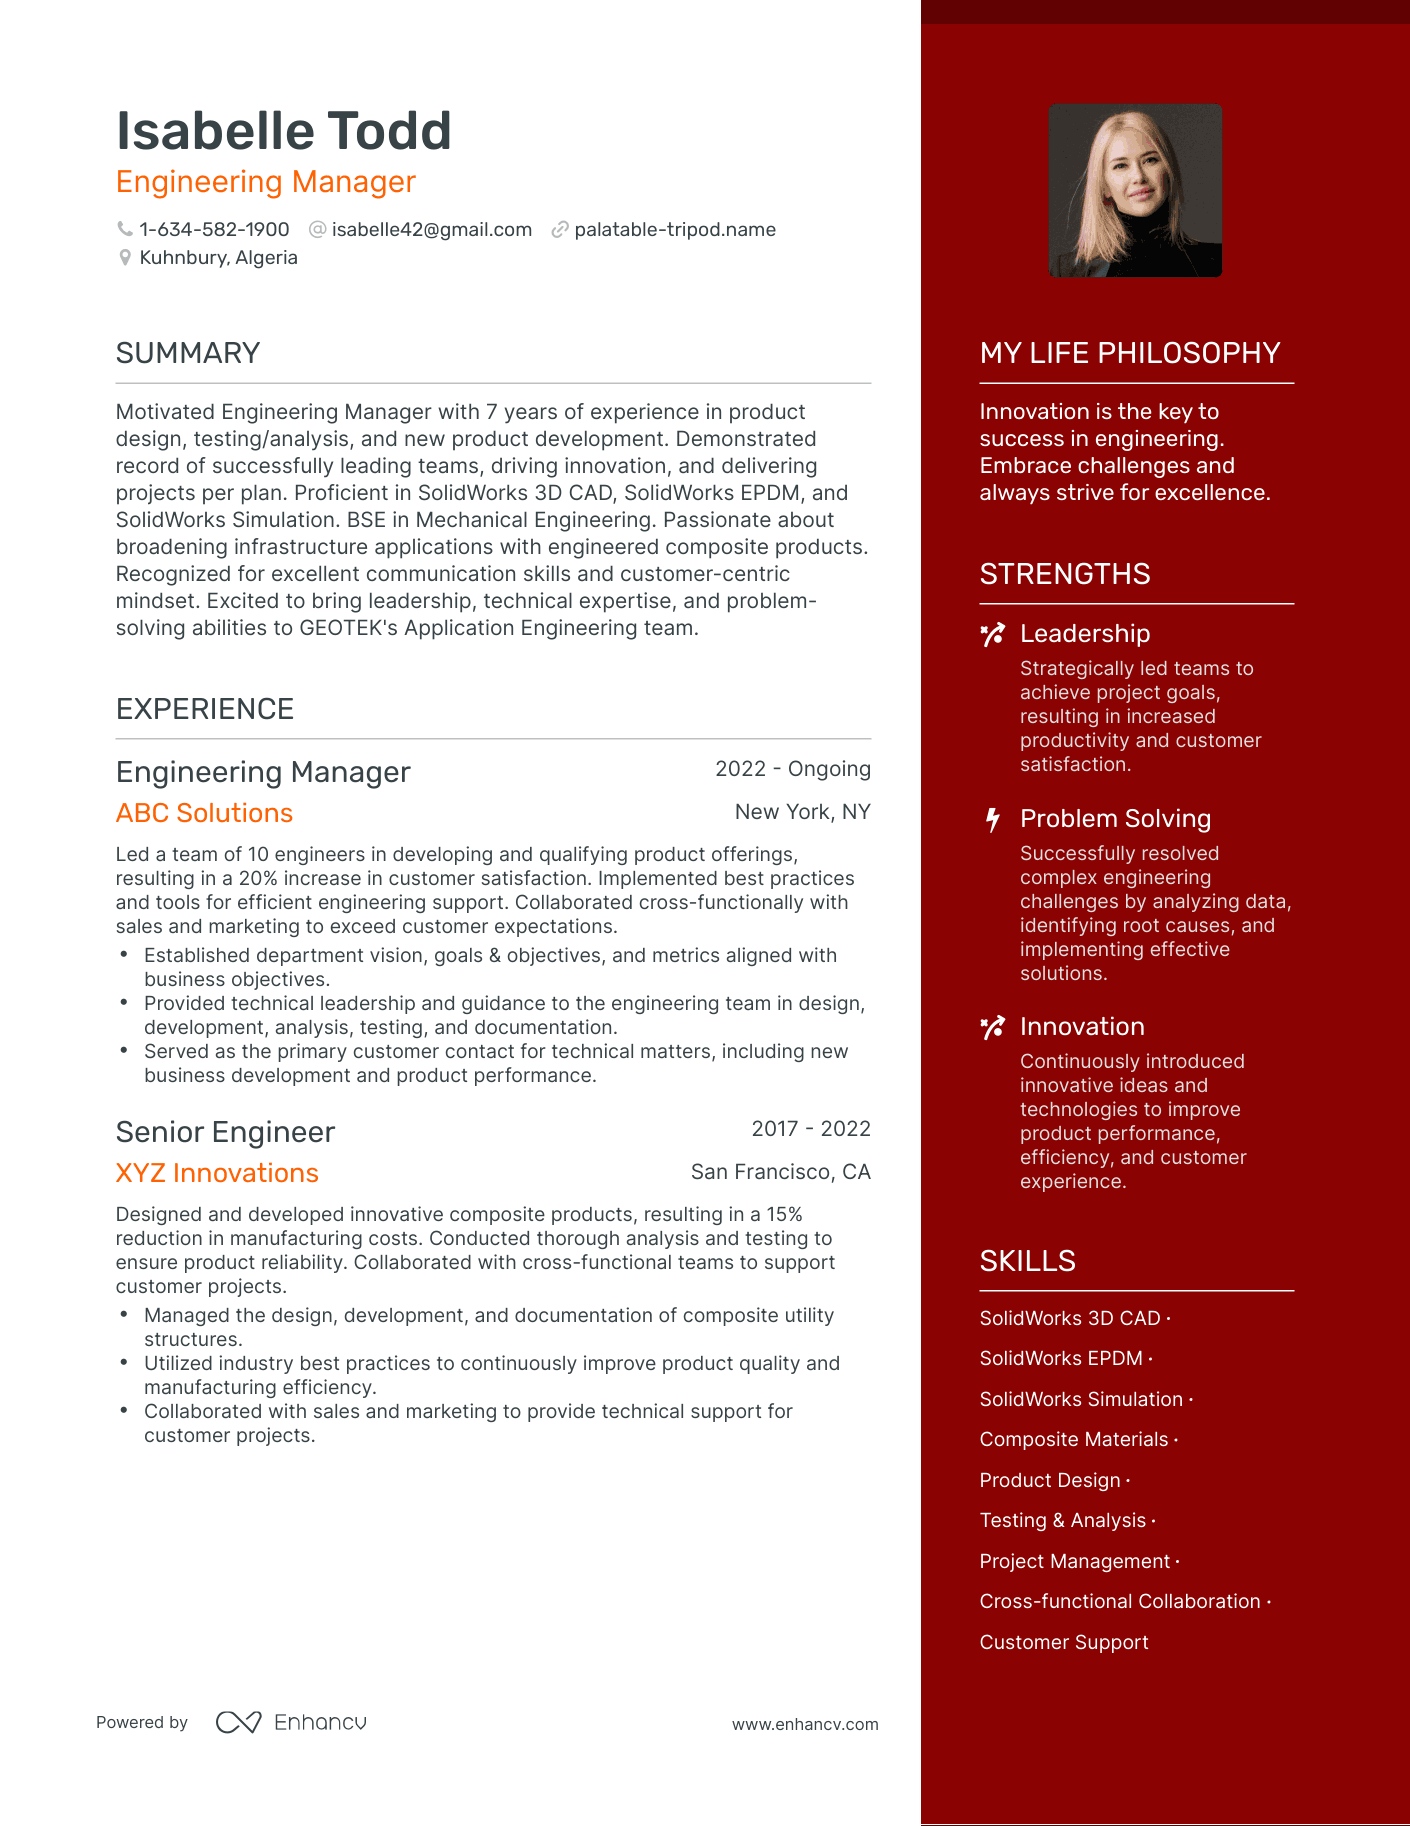 Engineering Manager resume example